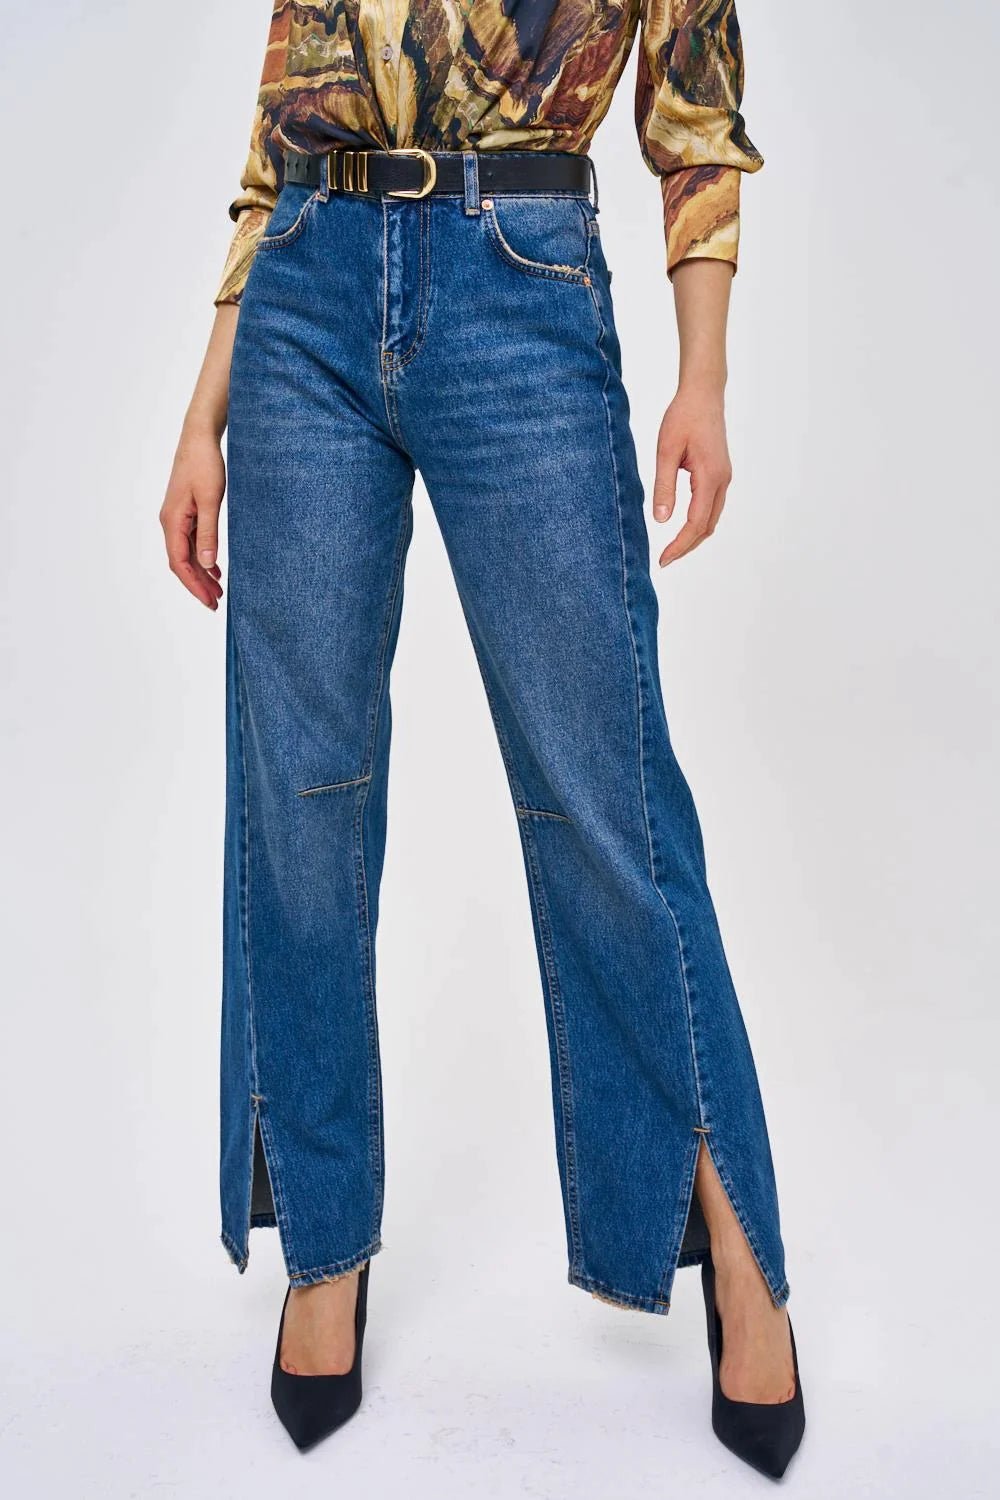 WIDE LEG WOMEN'S JEANS WITH DECASTES - Lebbse